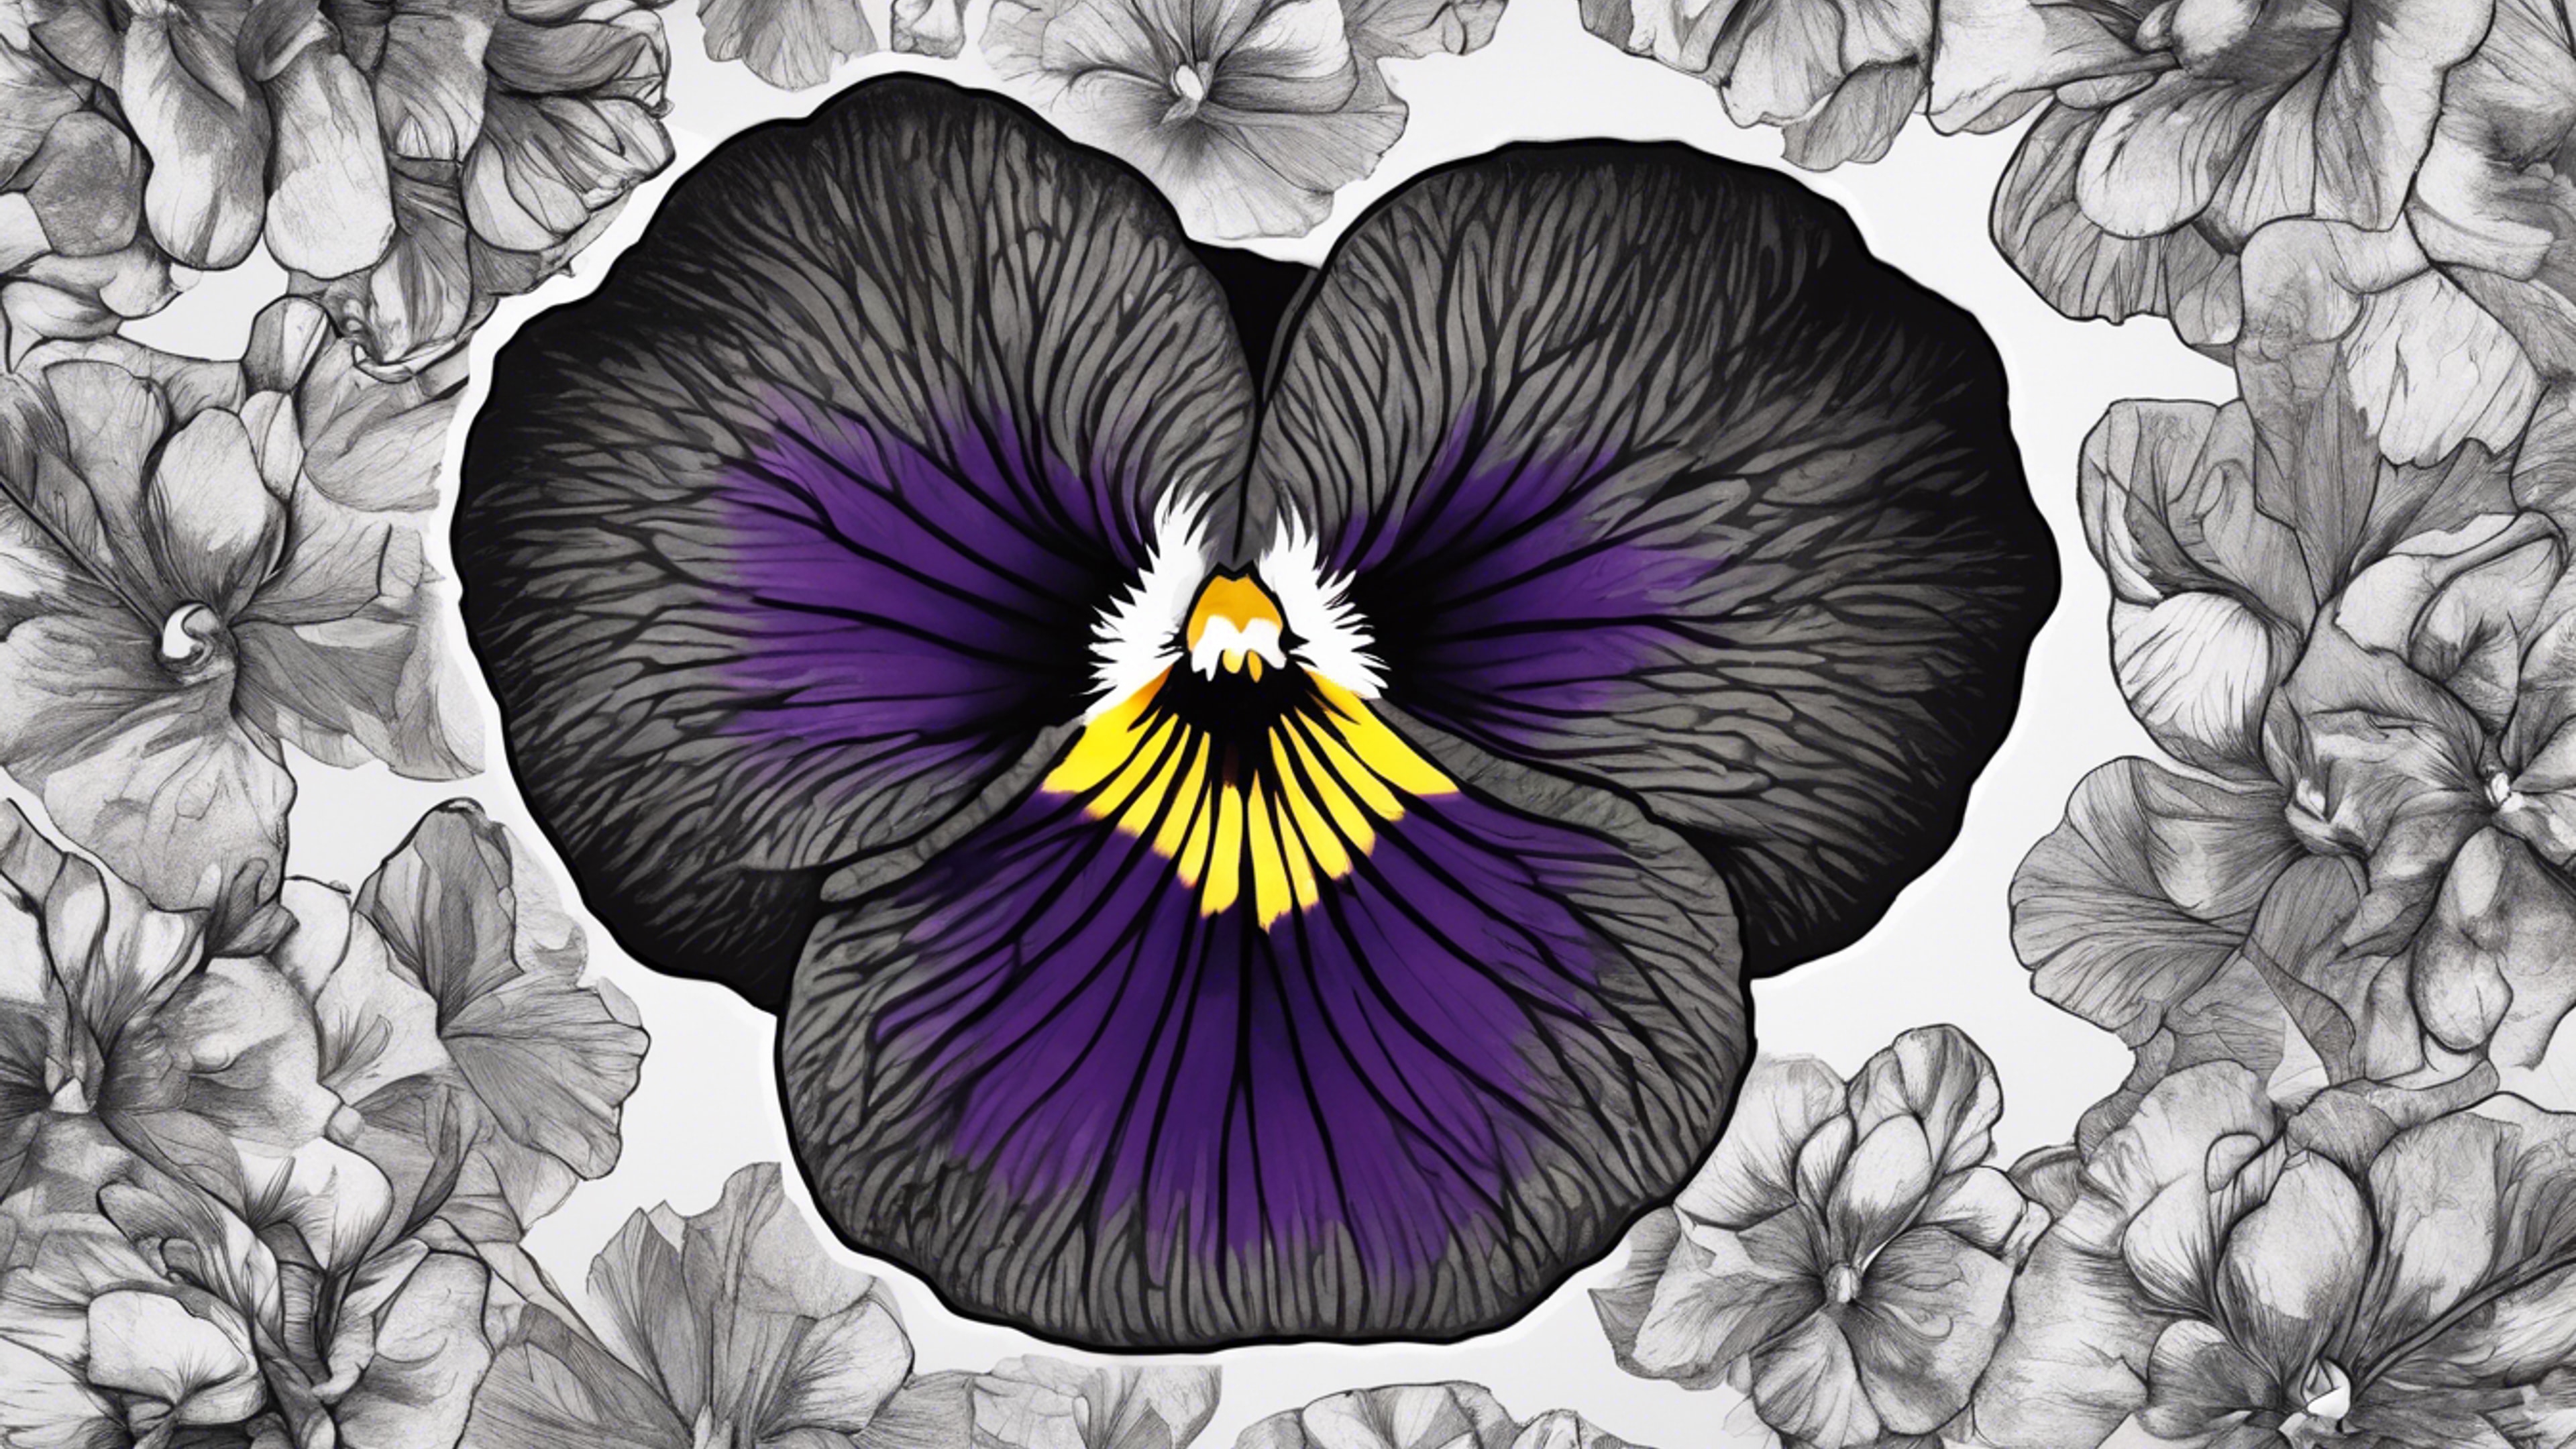 A beautifully detailed drawing of a black pansy with a heart-shaped pattern in the center. Tapeta[63bdabf8c2fc479fa211]